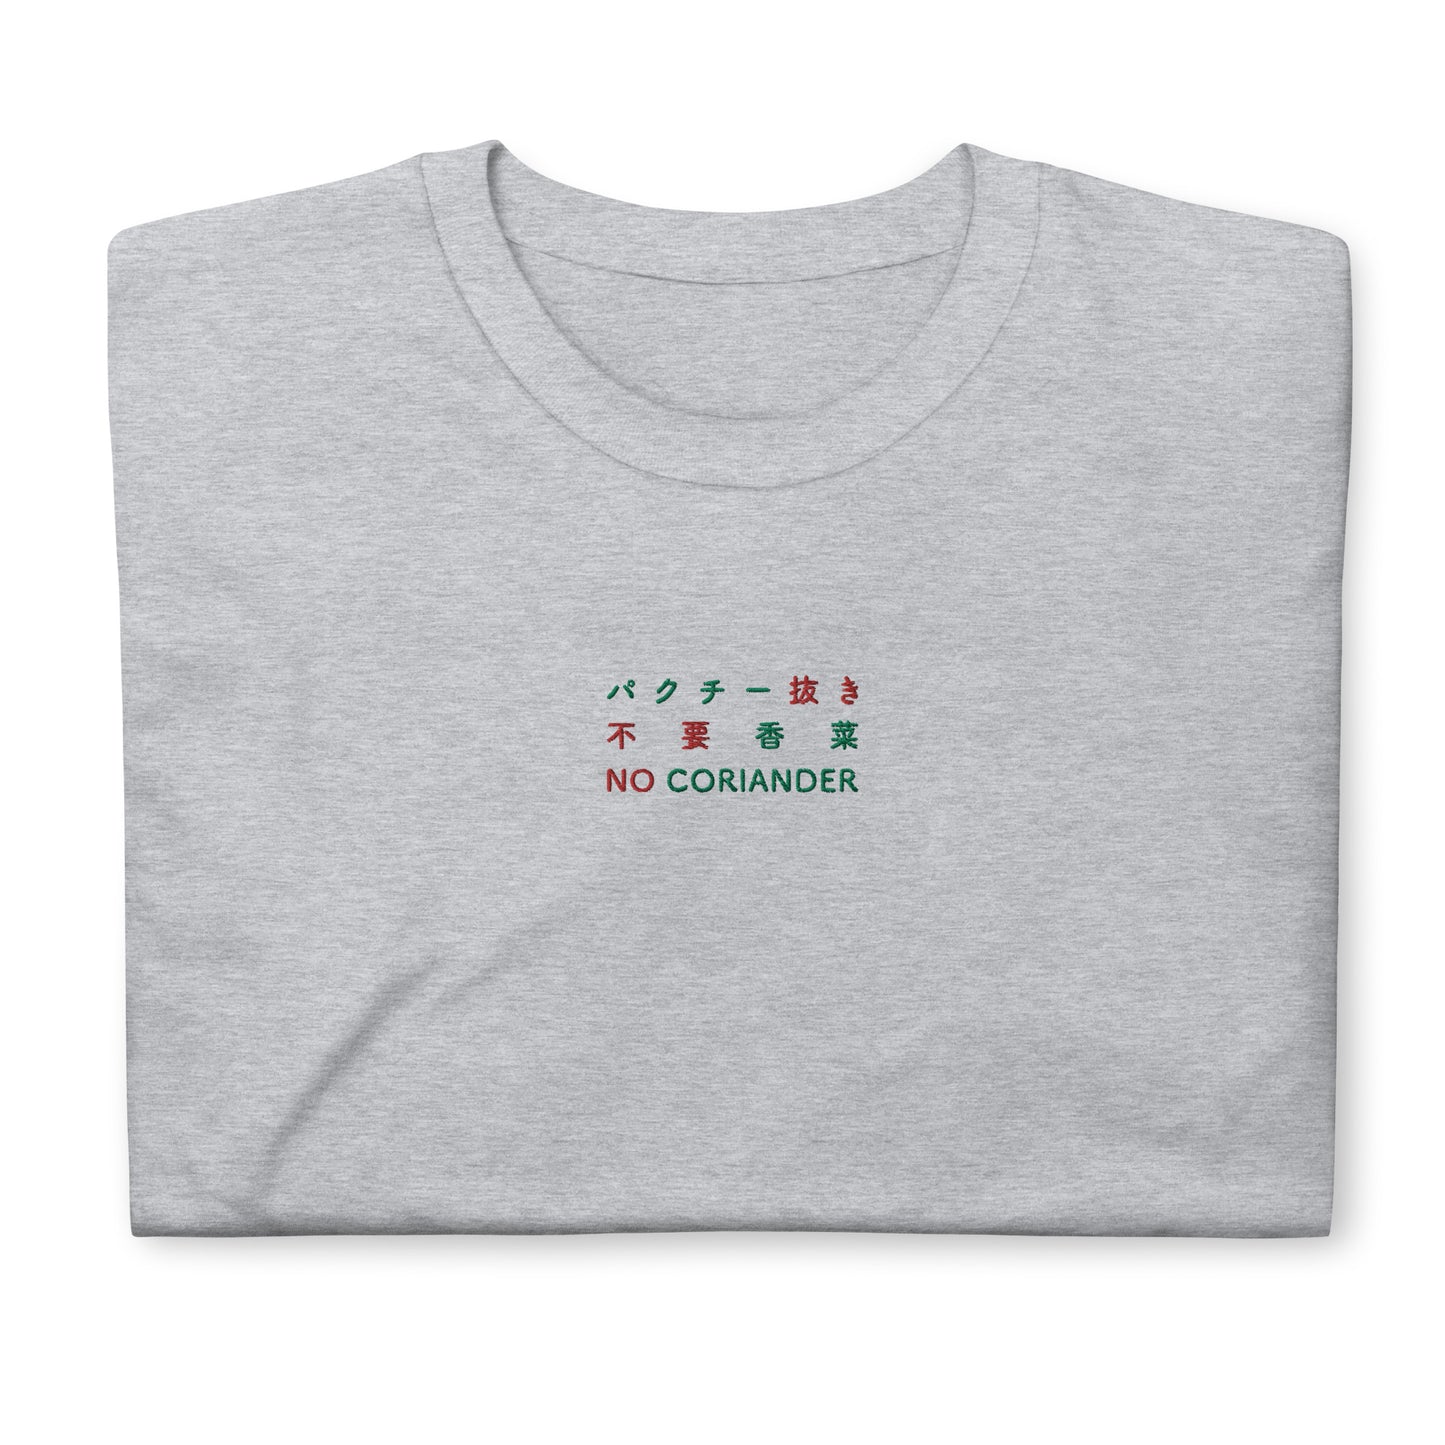 Light Gray High Quality Tee - Front Design with Red/Green Embroidery "NO CORIANDER" in three languages